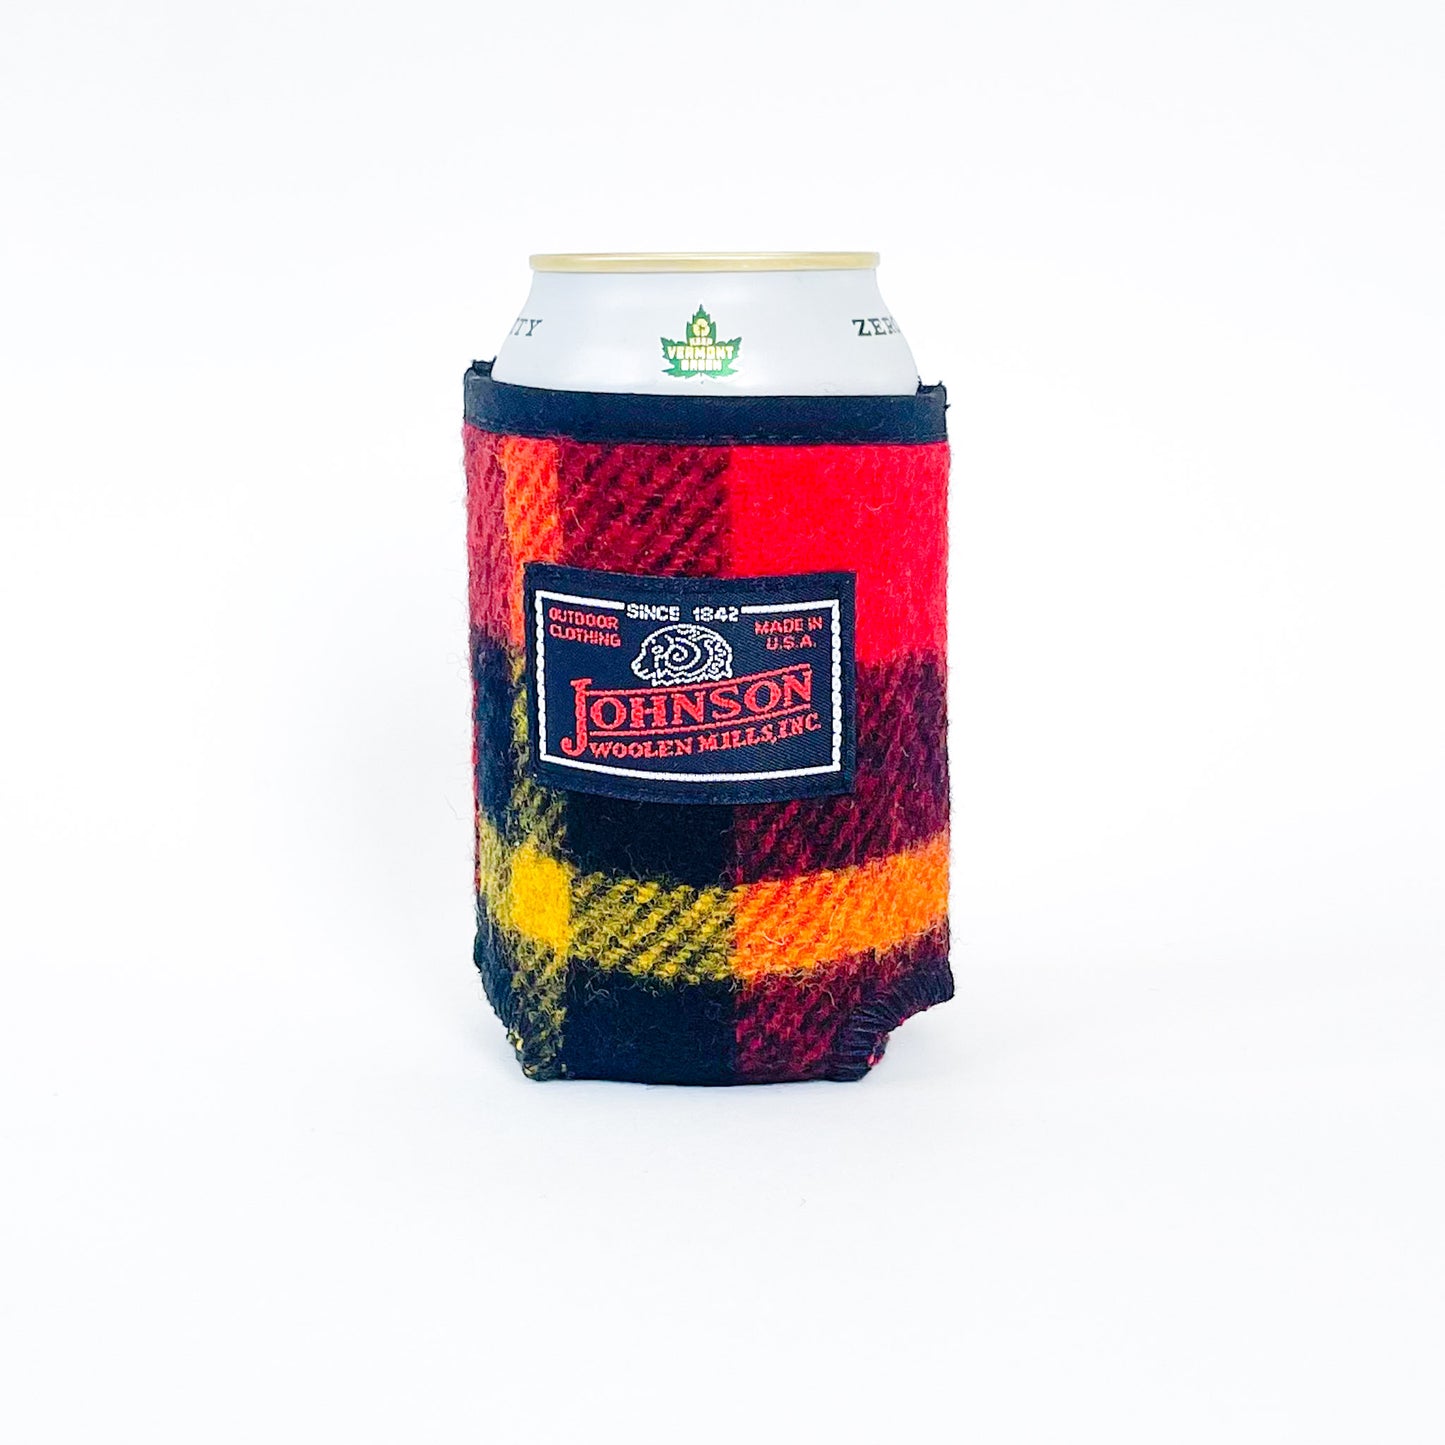 Johnson Woolen Mills bright red yellow and green plaid koozie